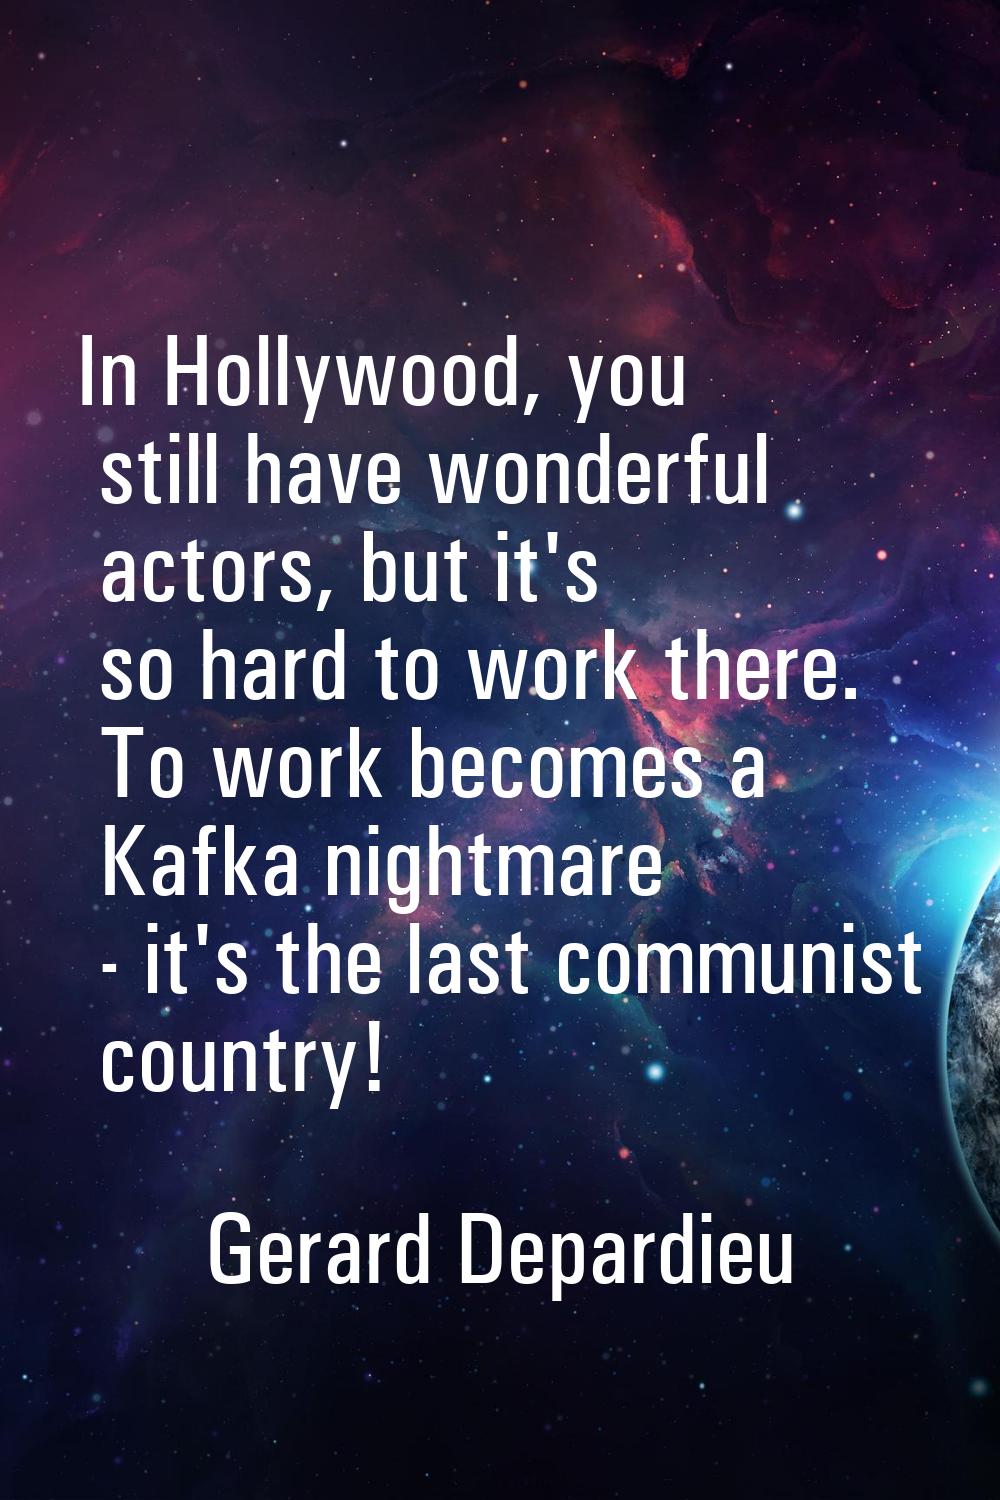 In Hollywood, you still have wonderful actors, but it's so hard to work there. To work becomes a Ka